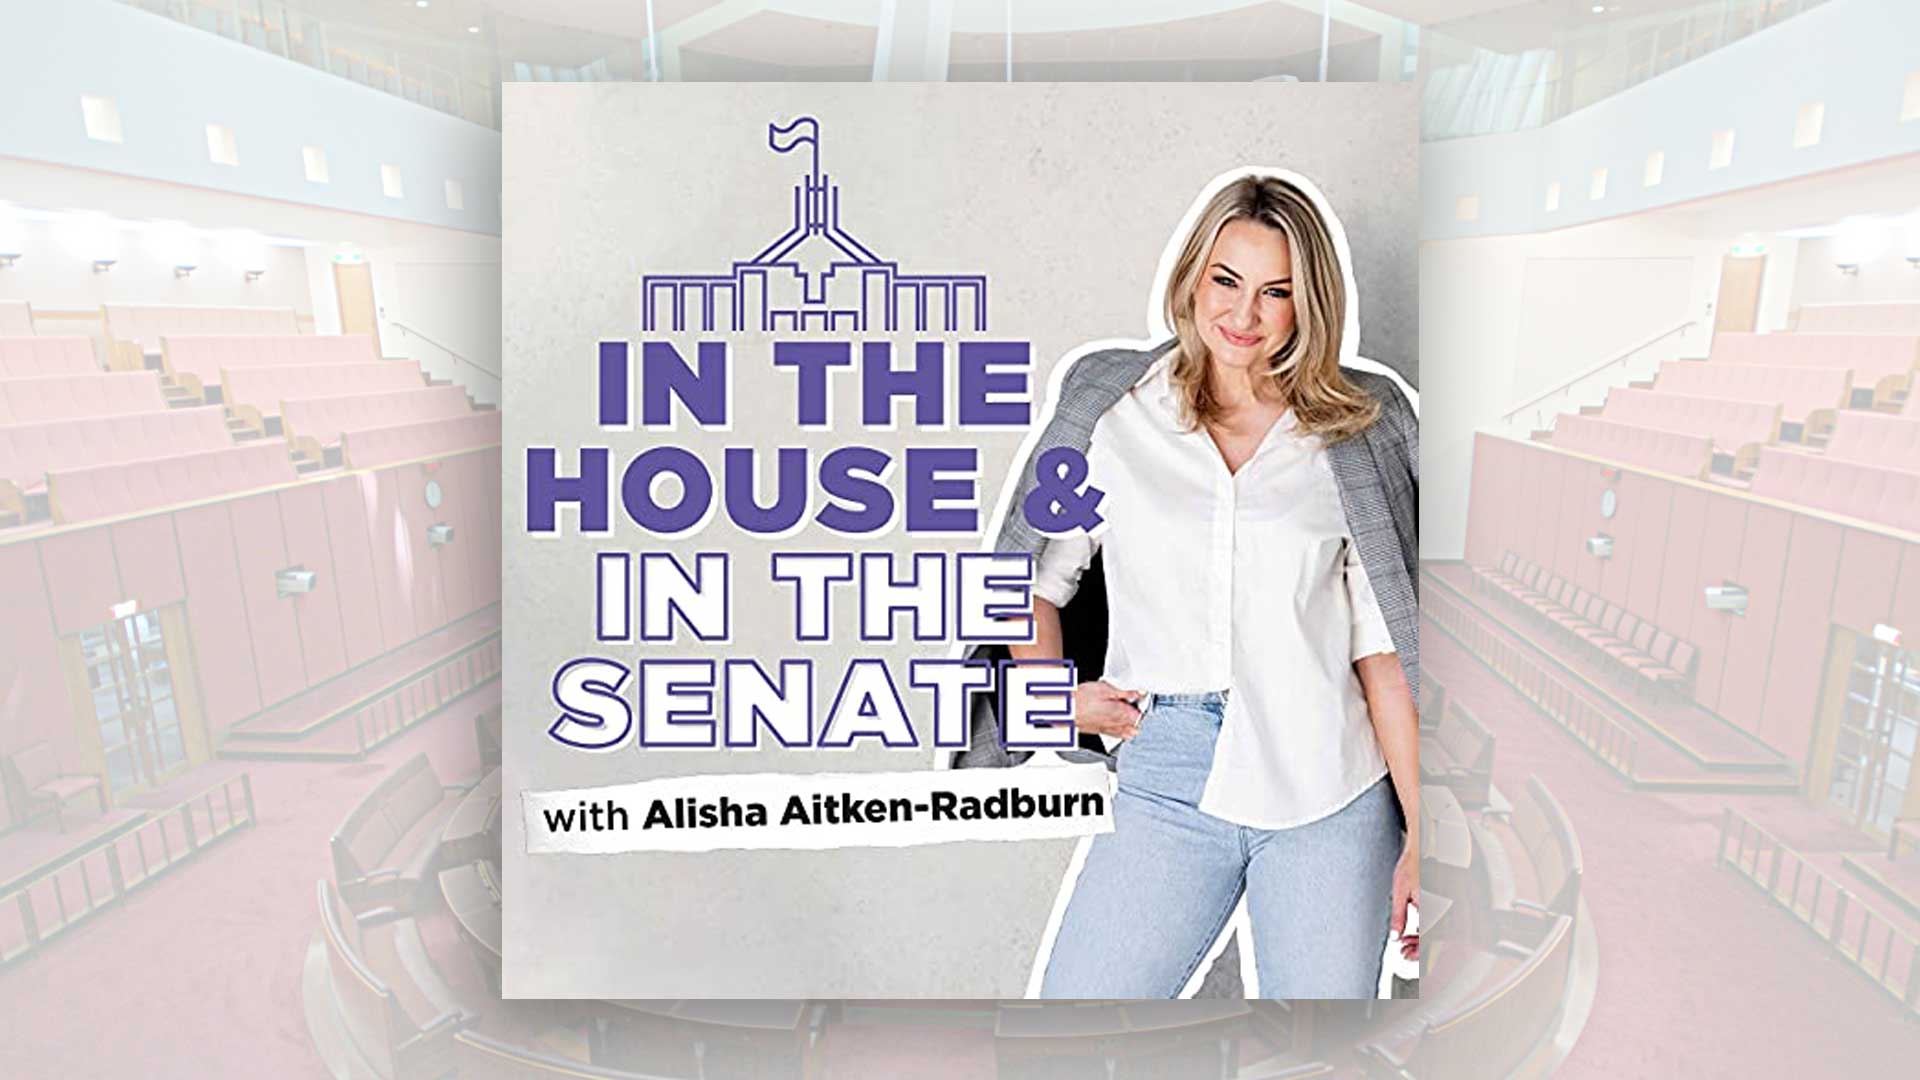 "In the House and in the Senate" logo featuring an illustration of Parliament House and a photograph of the presenter, a blonde woman wearing a casual blazer and jeans